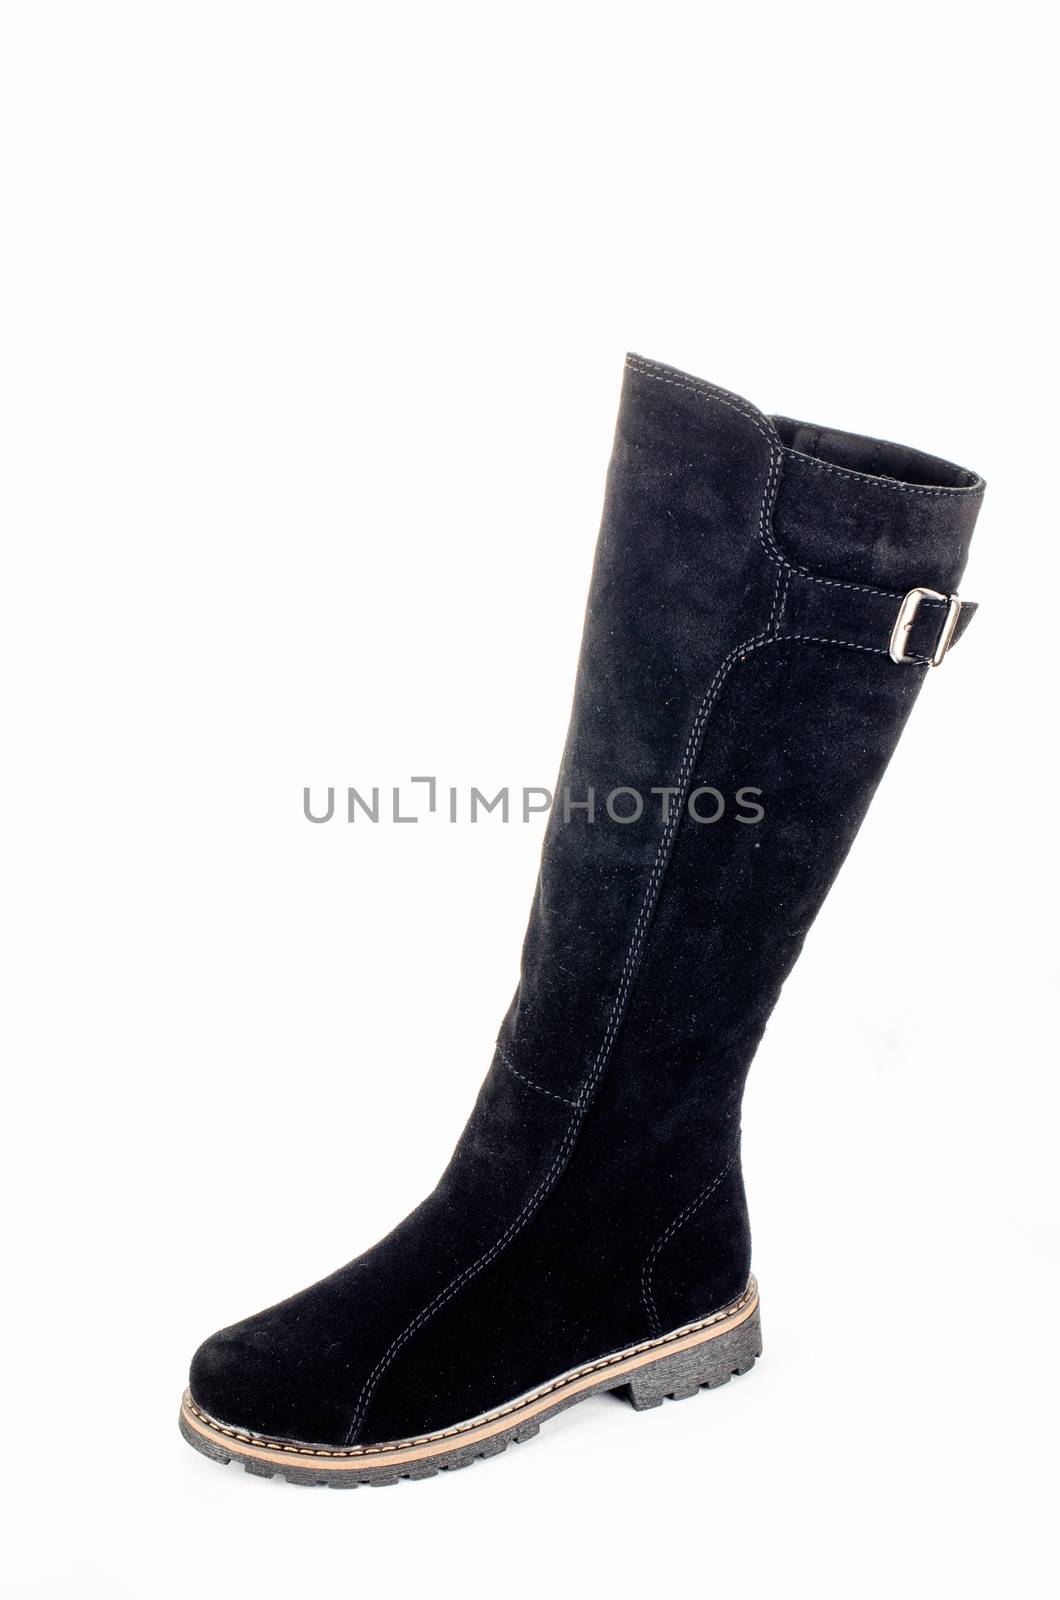 Womens leather boots by Morfey713